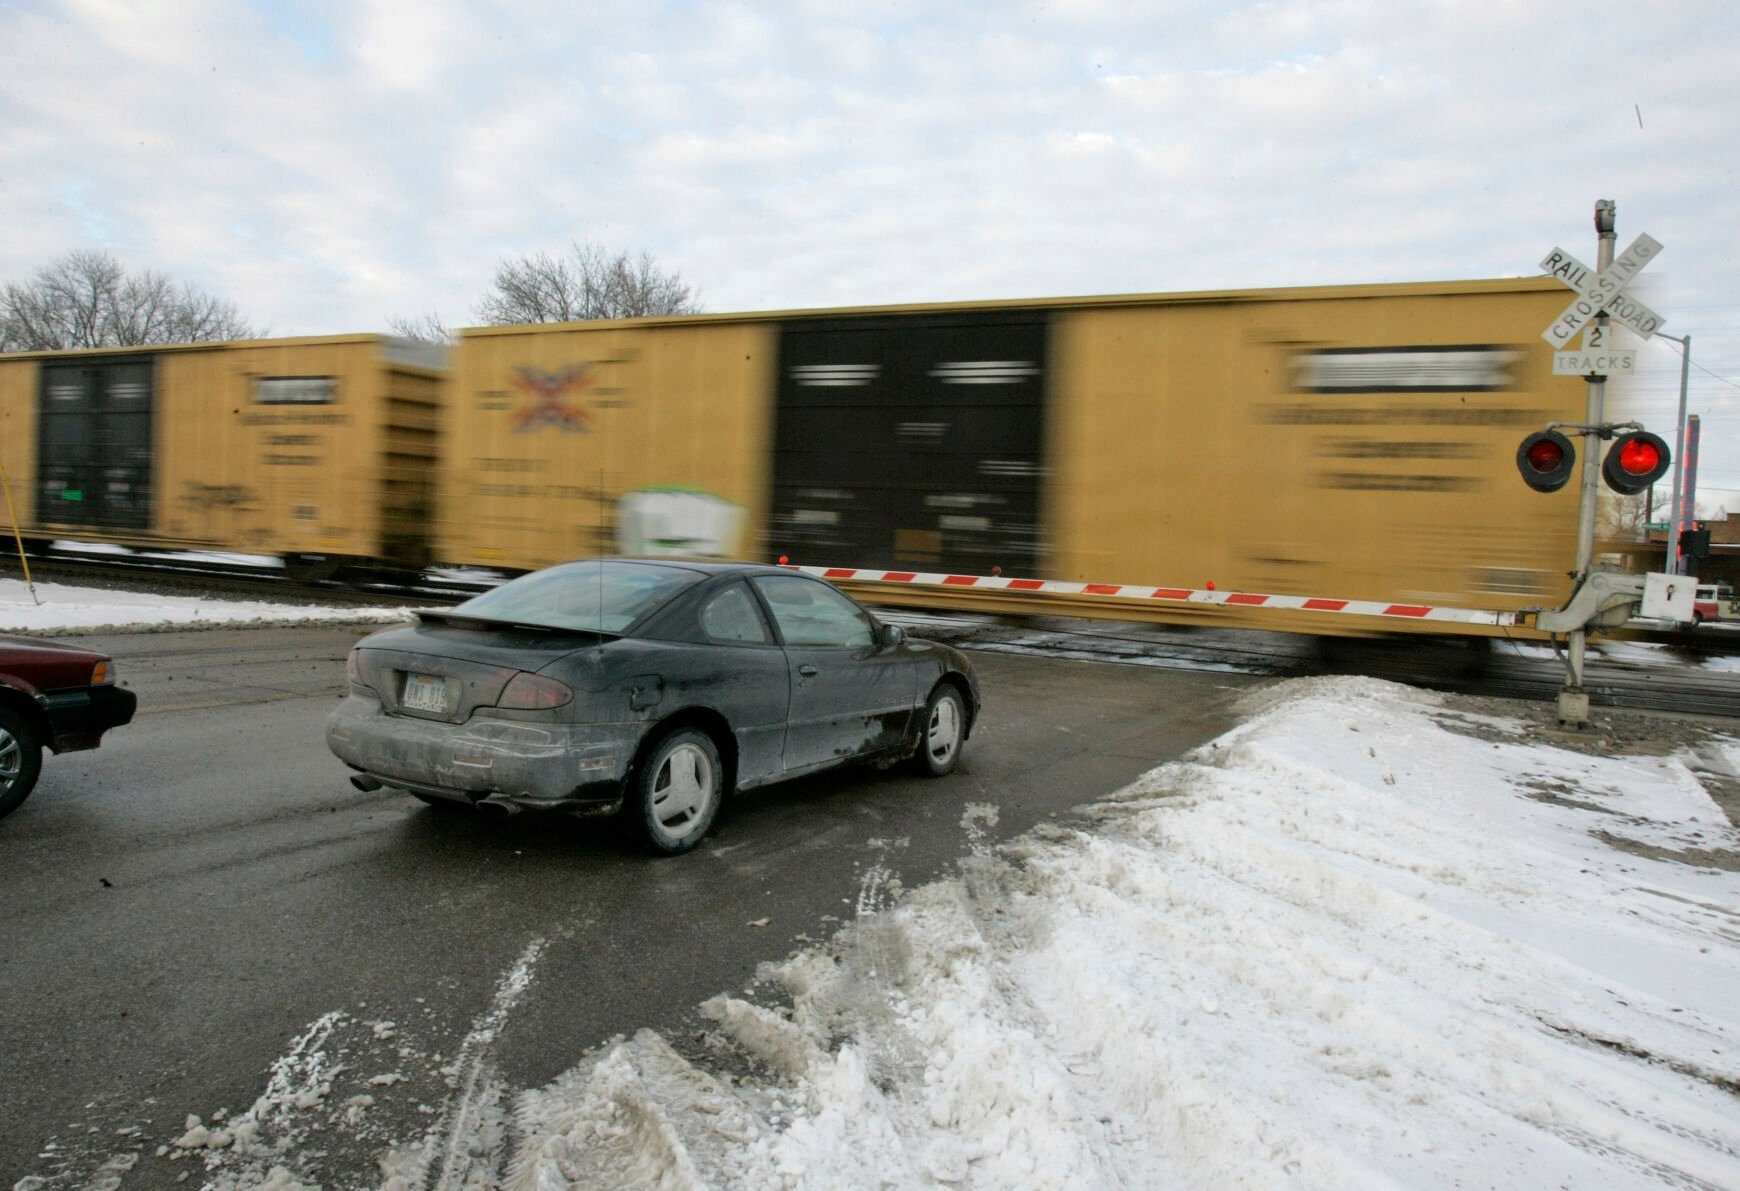 <p>FILE - Cars wait for a train to pass, in Valley, Neb., Wednesday, Jan. 17, 2007. With the rail industry relying on longer and longer trains to cut costs, the Biden administration is handing out $570 million in grants to help eliminate railroad crossings in 32 states. The grants announced Monday, June 5, 2023 will help eliminate more than three dozen crossings that delay traffic and sometimes keep first responders from where help is desperately needed. (AP Photo/Nati Harnik, File)</p>   PHOTO CREDIT: Nati Harnik 